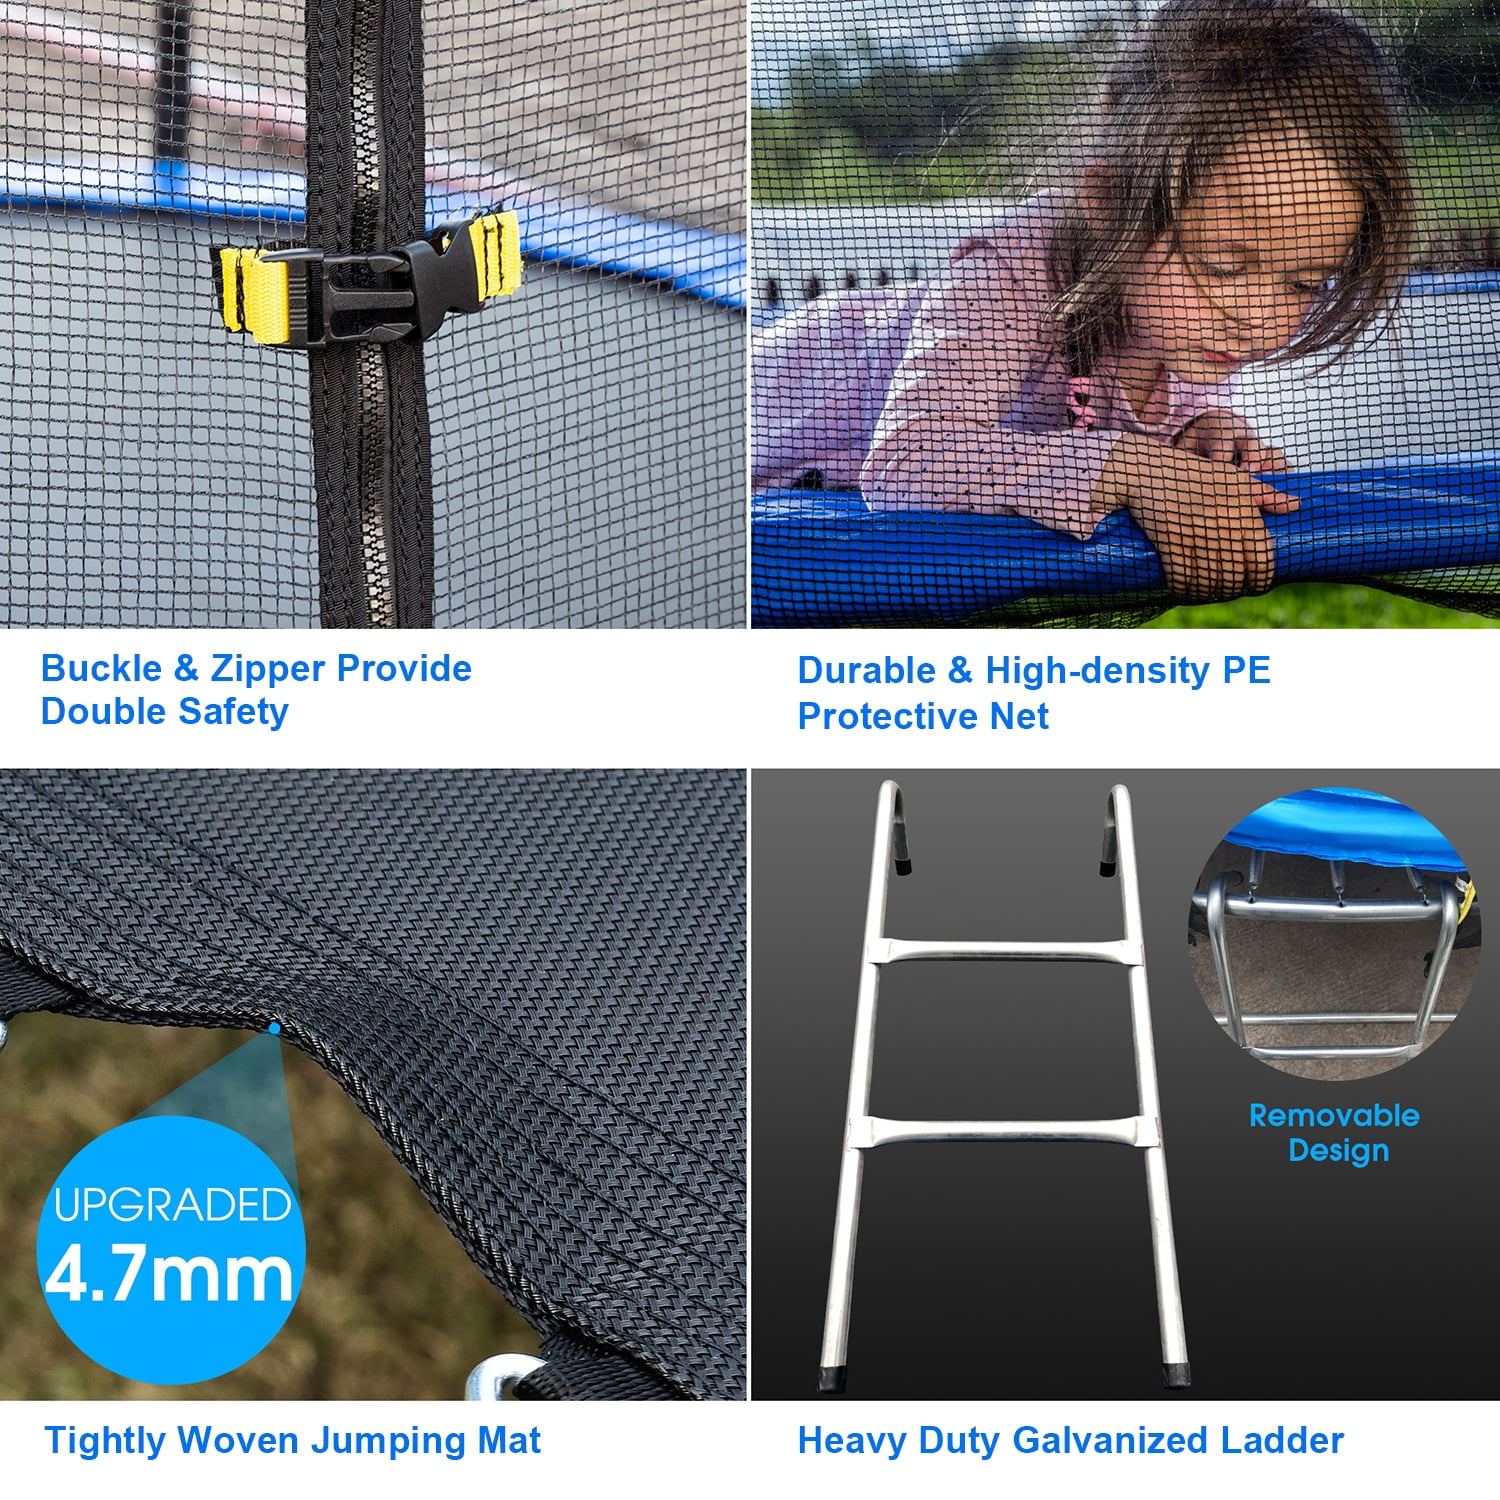 UMei 2020 Upgraded Trampoline for Kids,12 FT Trampoline with Enclosure Net and Poles Safety Pad Ladder Jumping Mat,Spring Cover Pad,Adults Indoor/Garden Workout,US Stock 